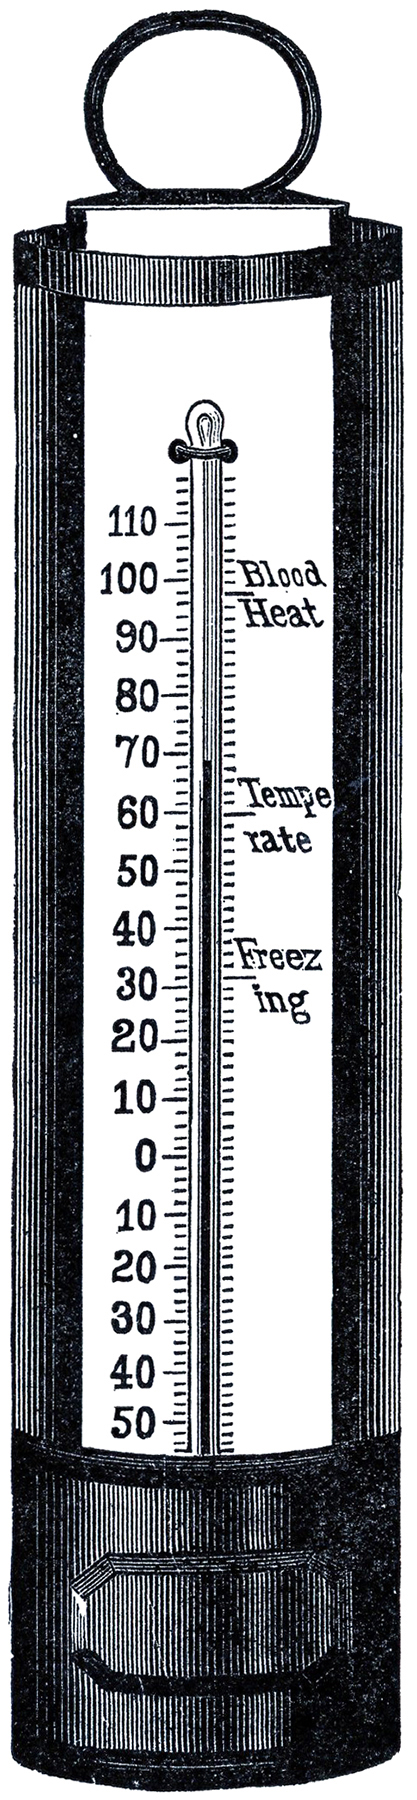 Free Thermometer Clip Art The Graphics Fairy